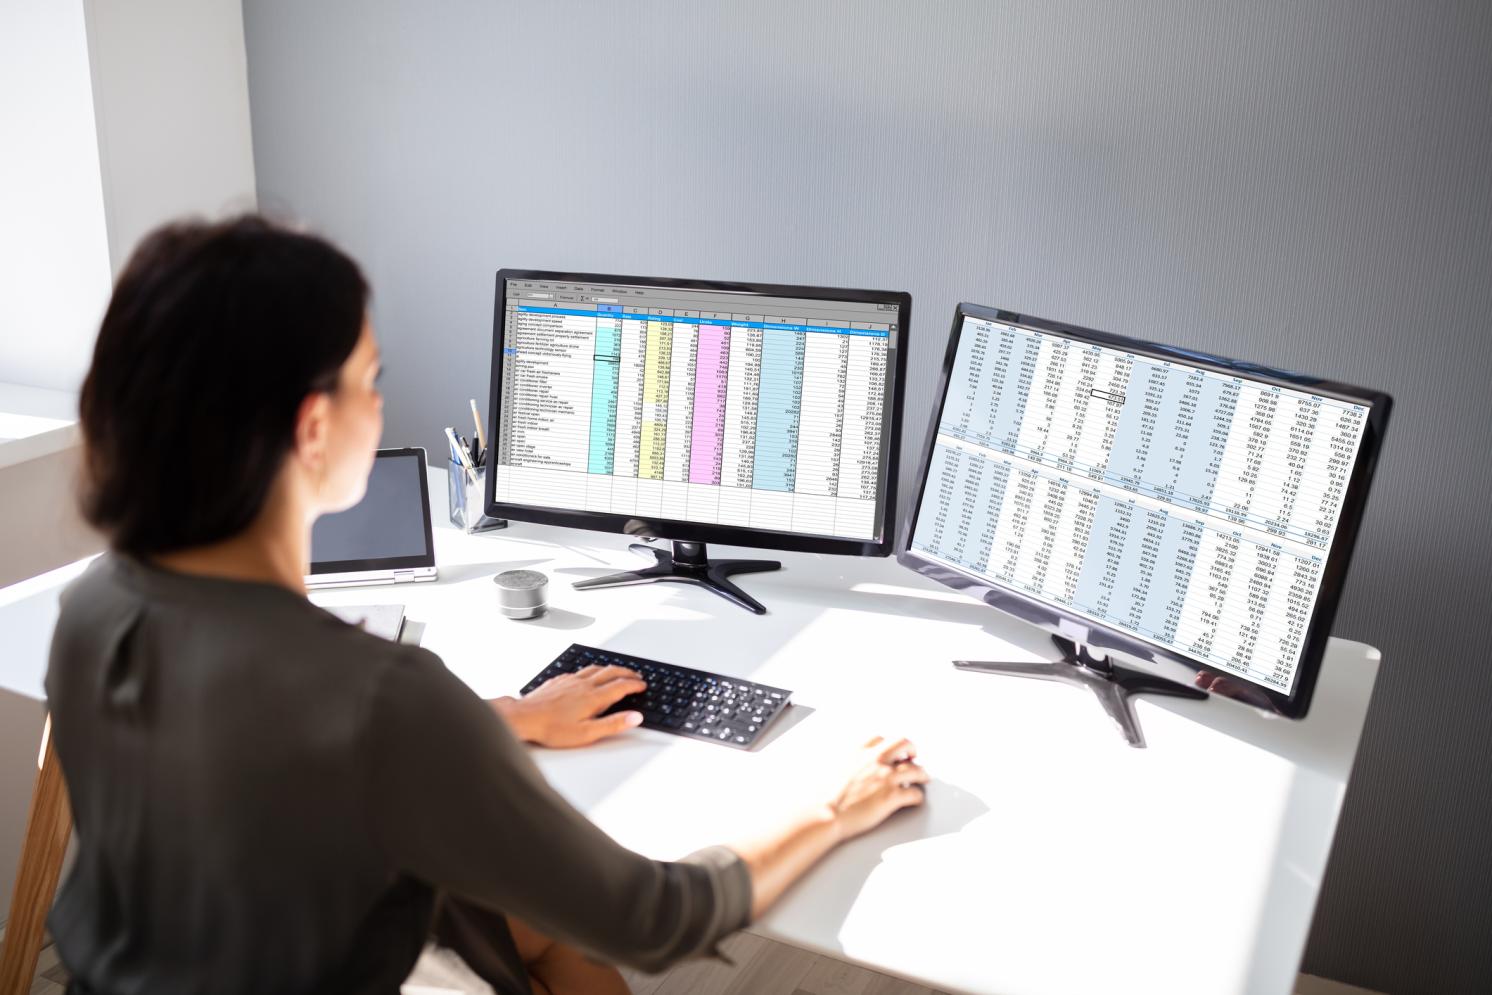 Female looking at two computer screens conducting analysis of spreadsheets